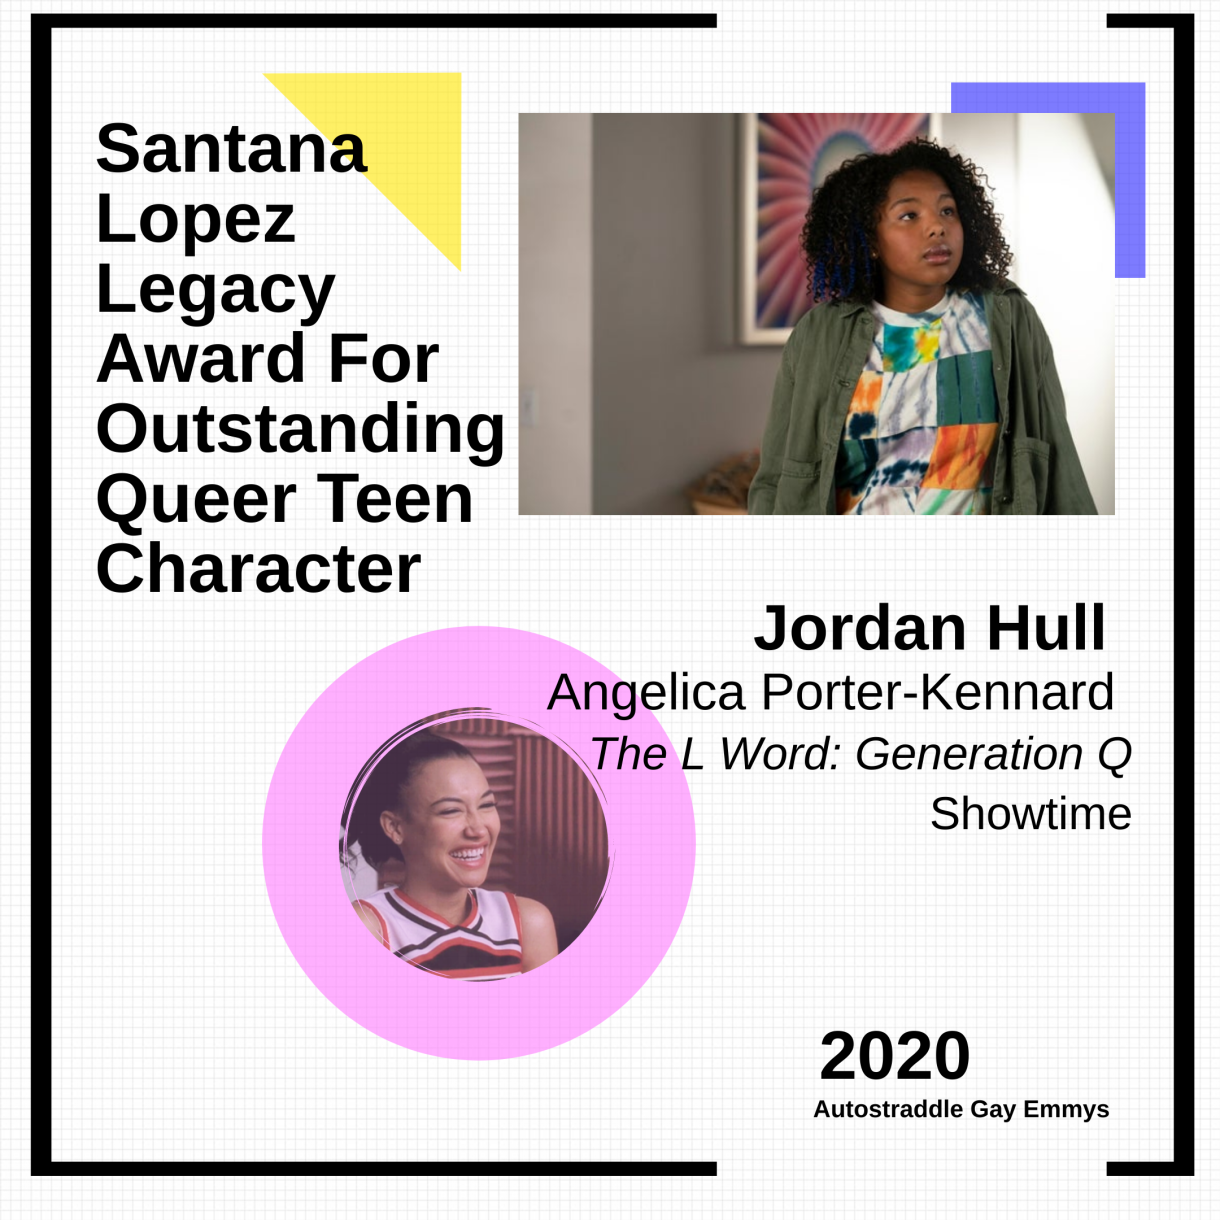 Colorful graphic for Santana Lopez Legacy Award For Outstanding Queer Teen Character: Jordan Hull as Angelica, The L Word: Generation Q (Showtime). Picture of Santana in a cheerleader uniform with a pink circle in one corner, picture of Jordan Hull as Angie in the other.